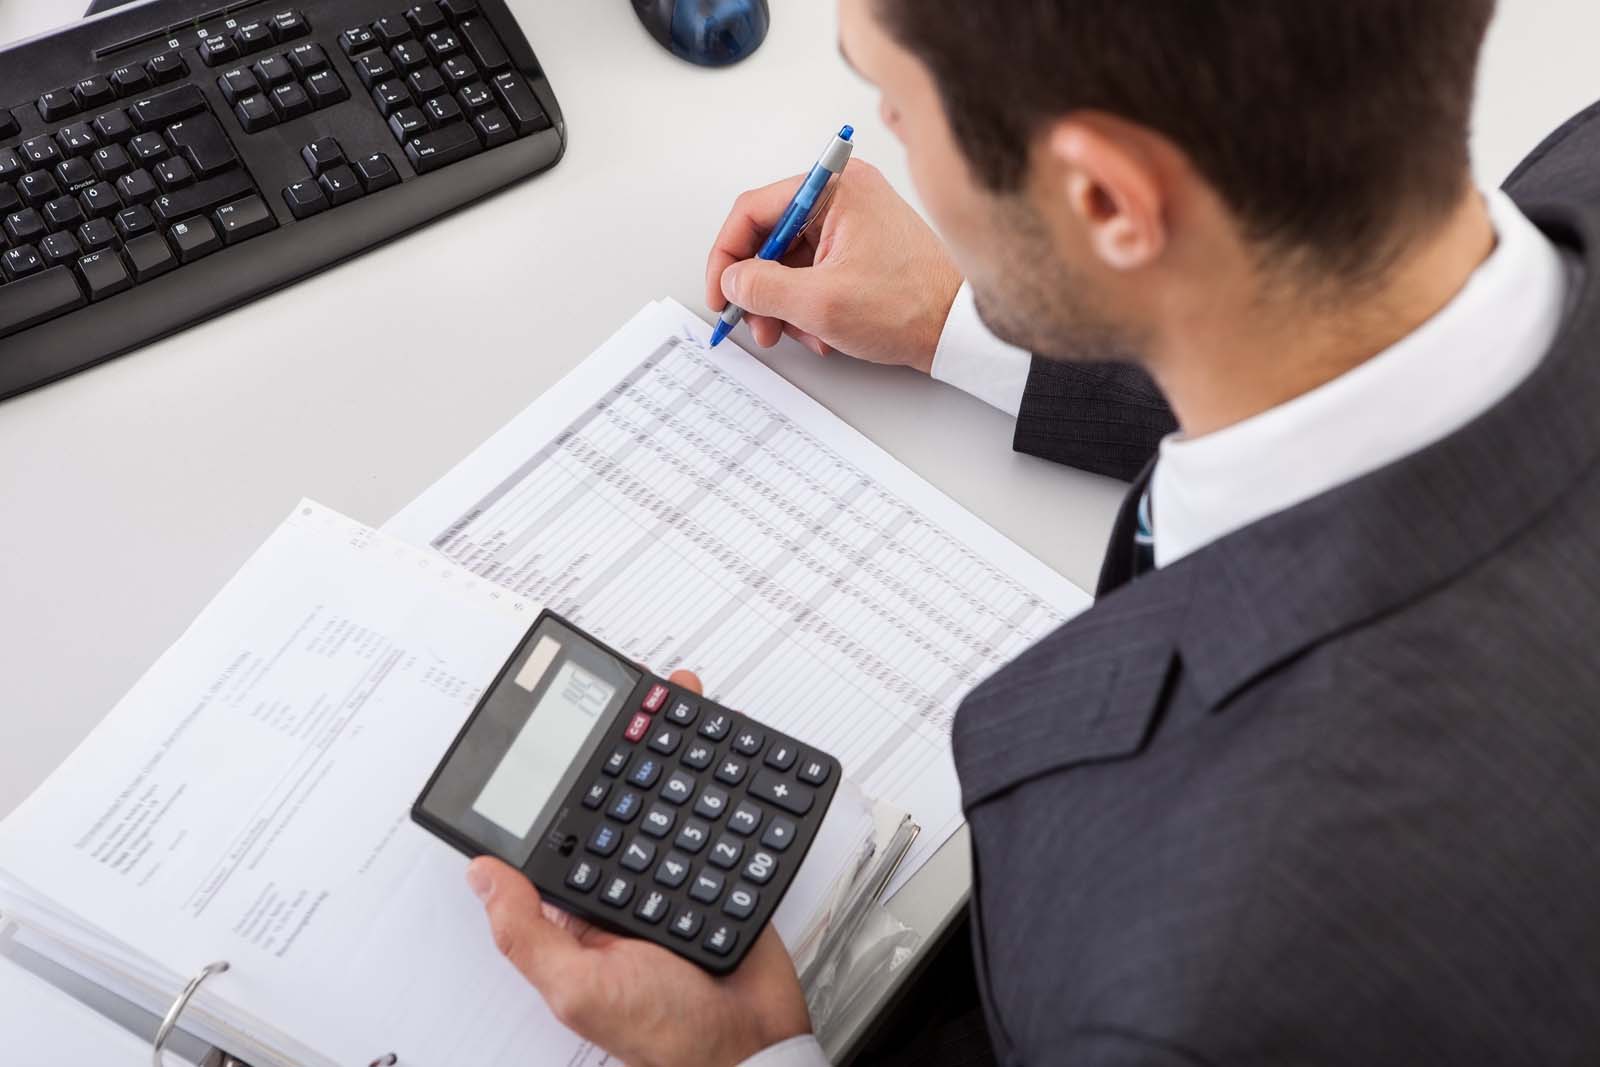 a person working at a desk using a calculator